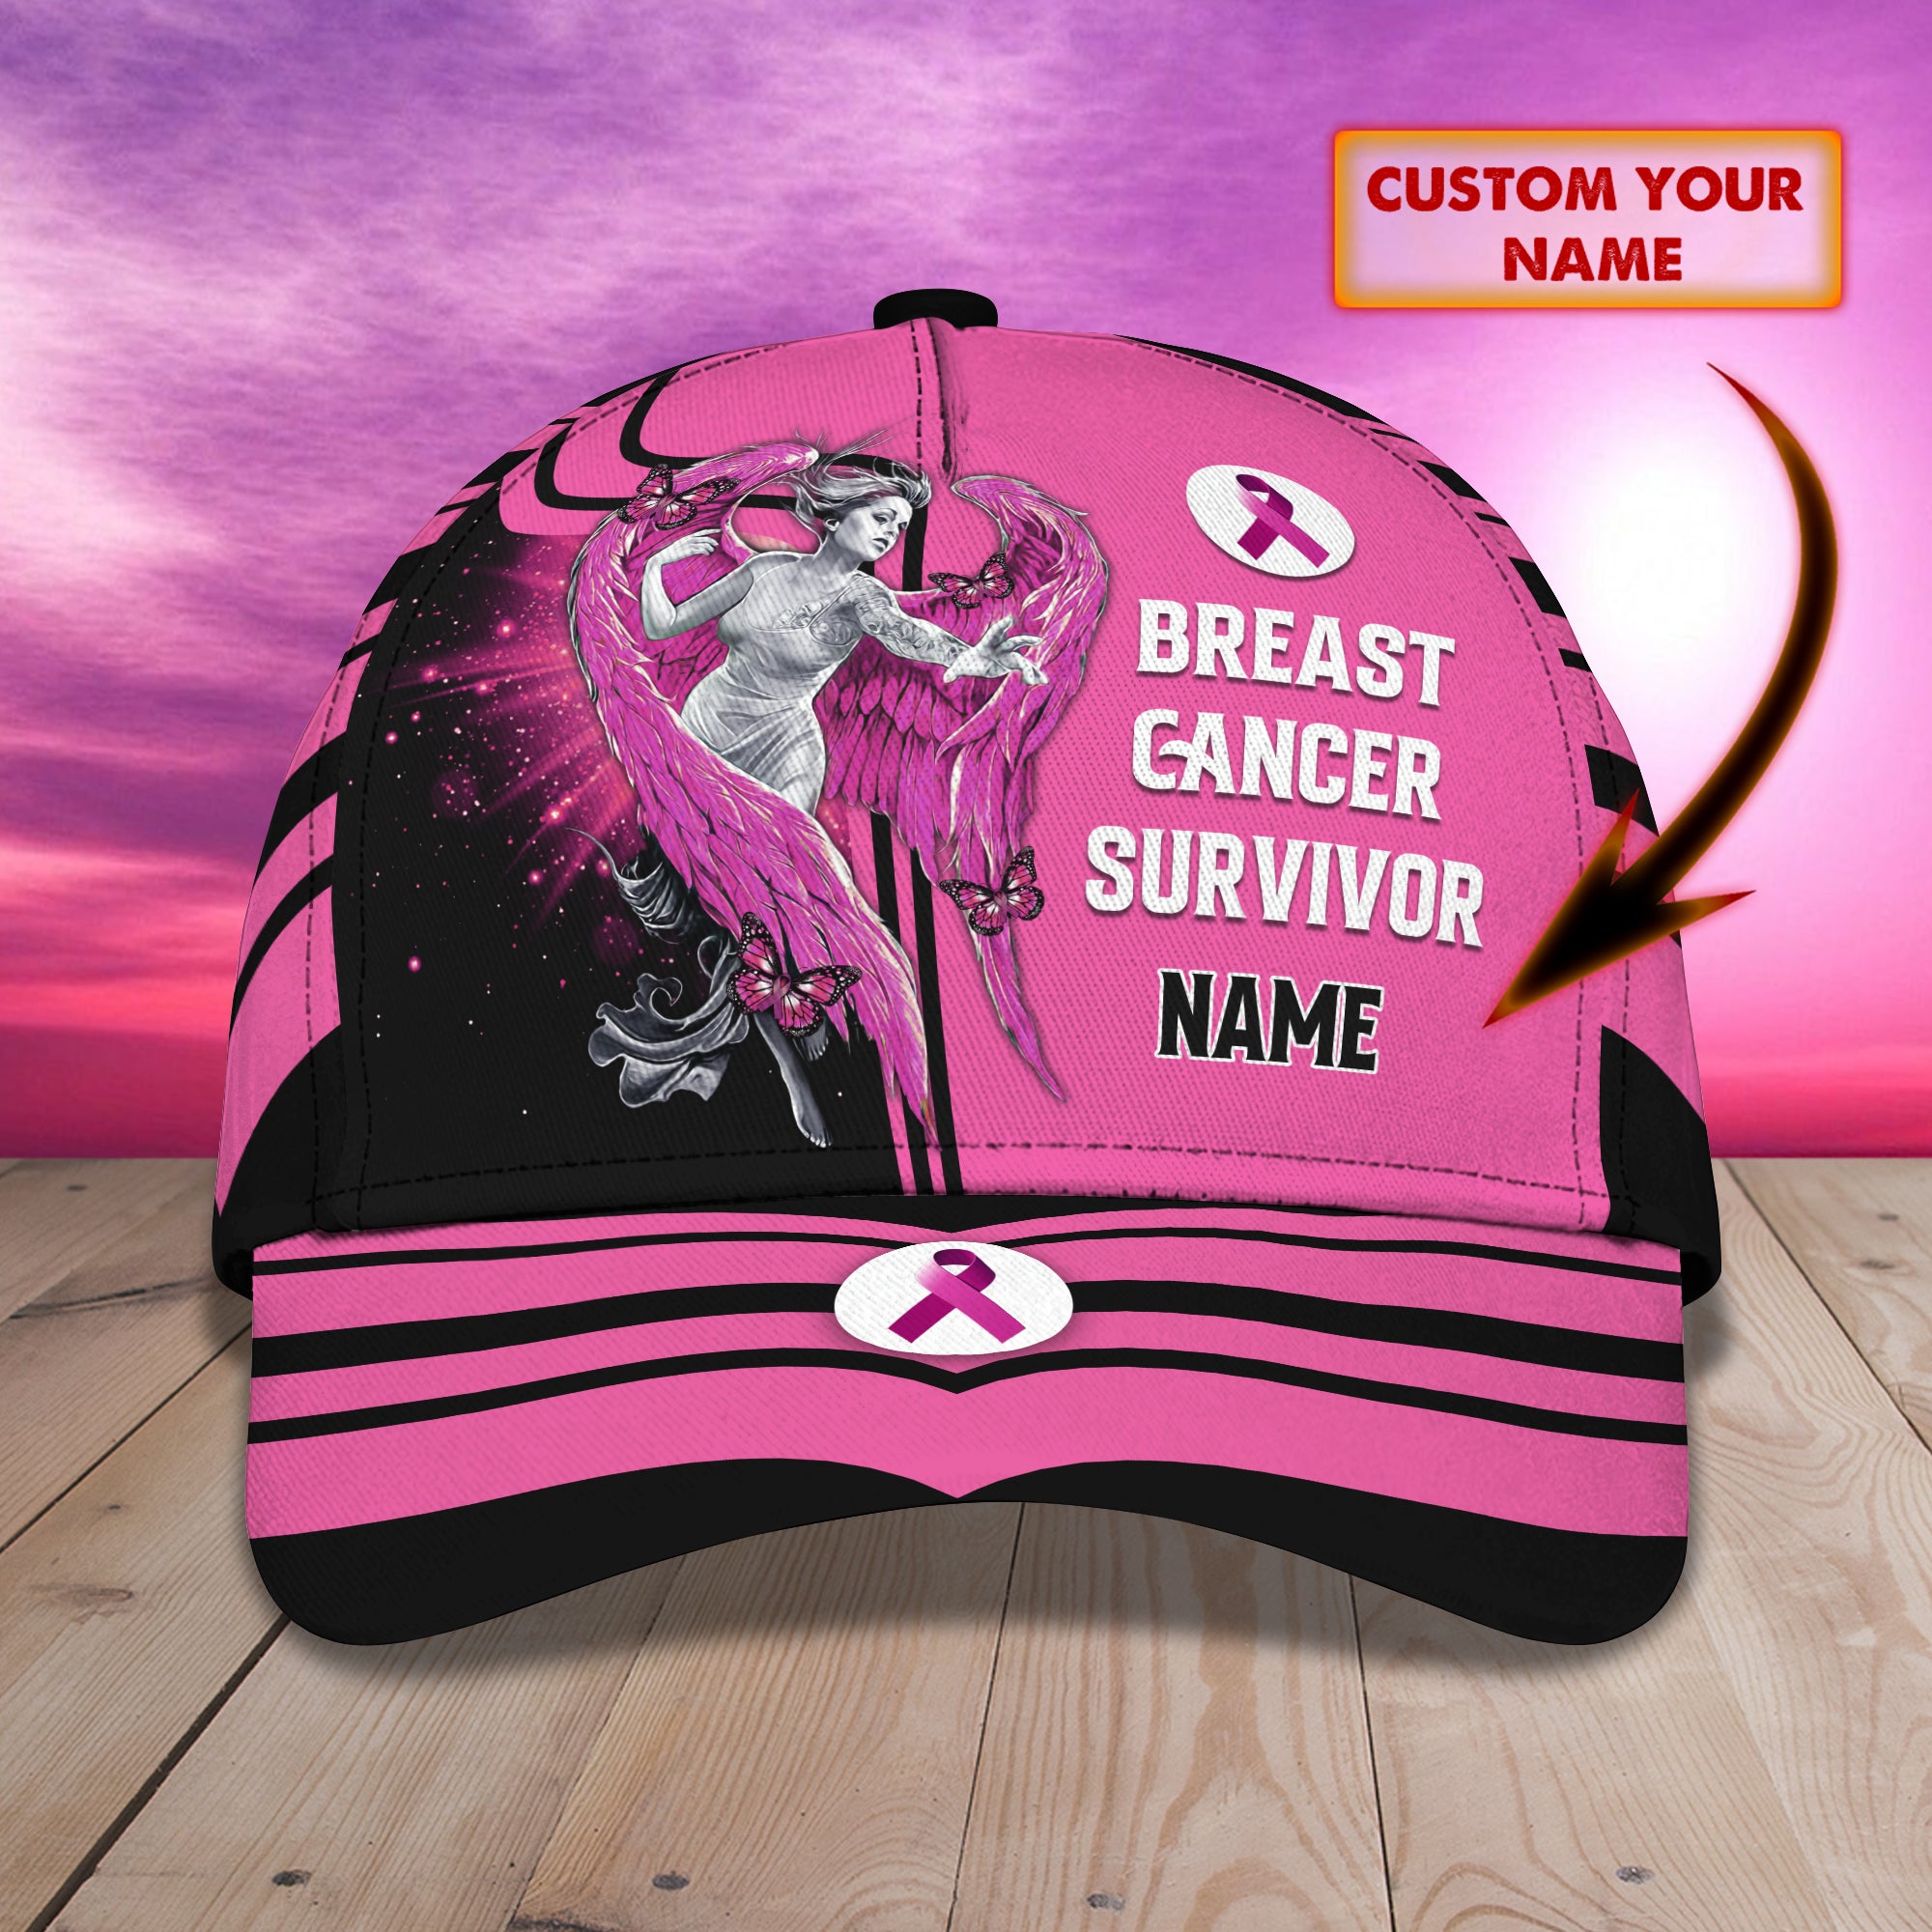 Breast Cancer Survivor- Personalized Name Cap For Breast Cancer Awareness -Loop- T2k-148